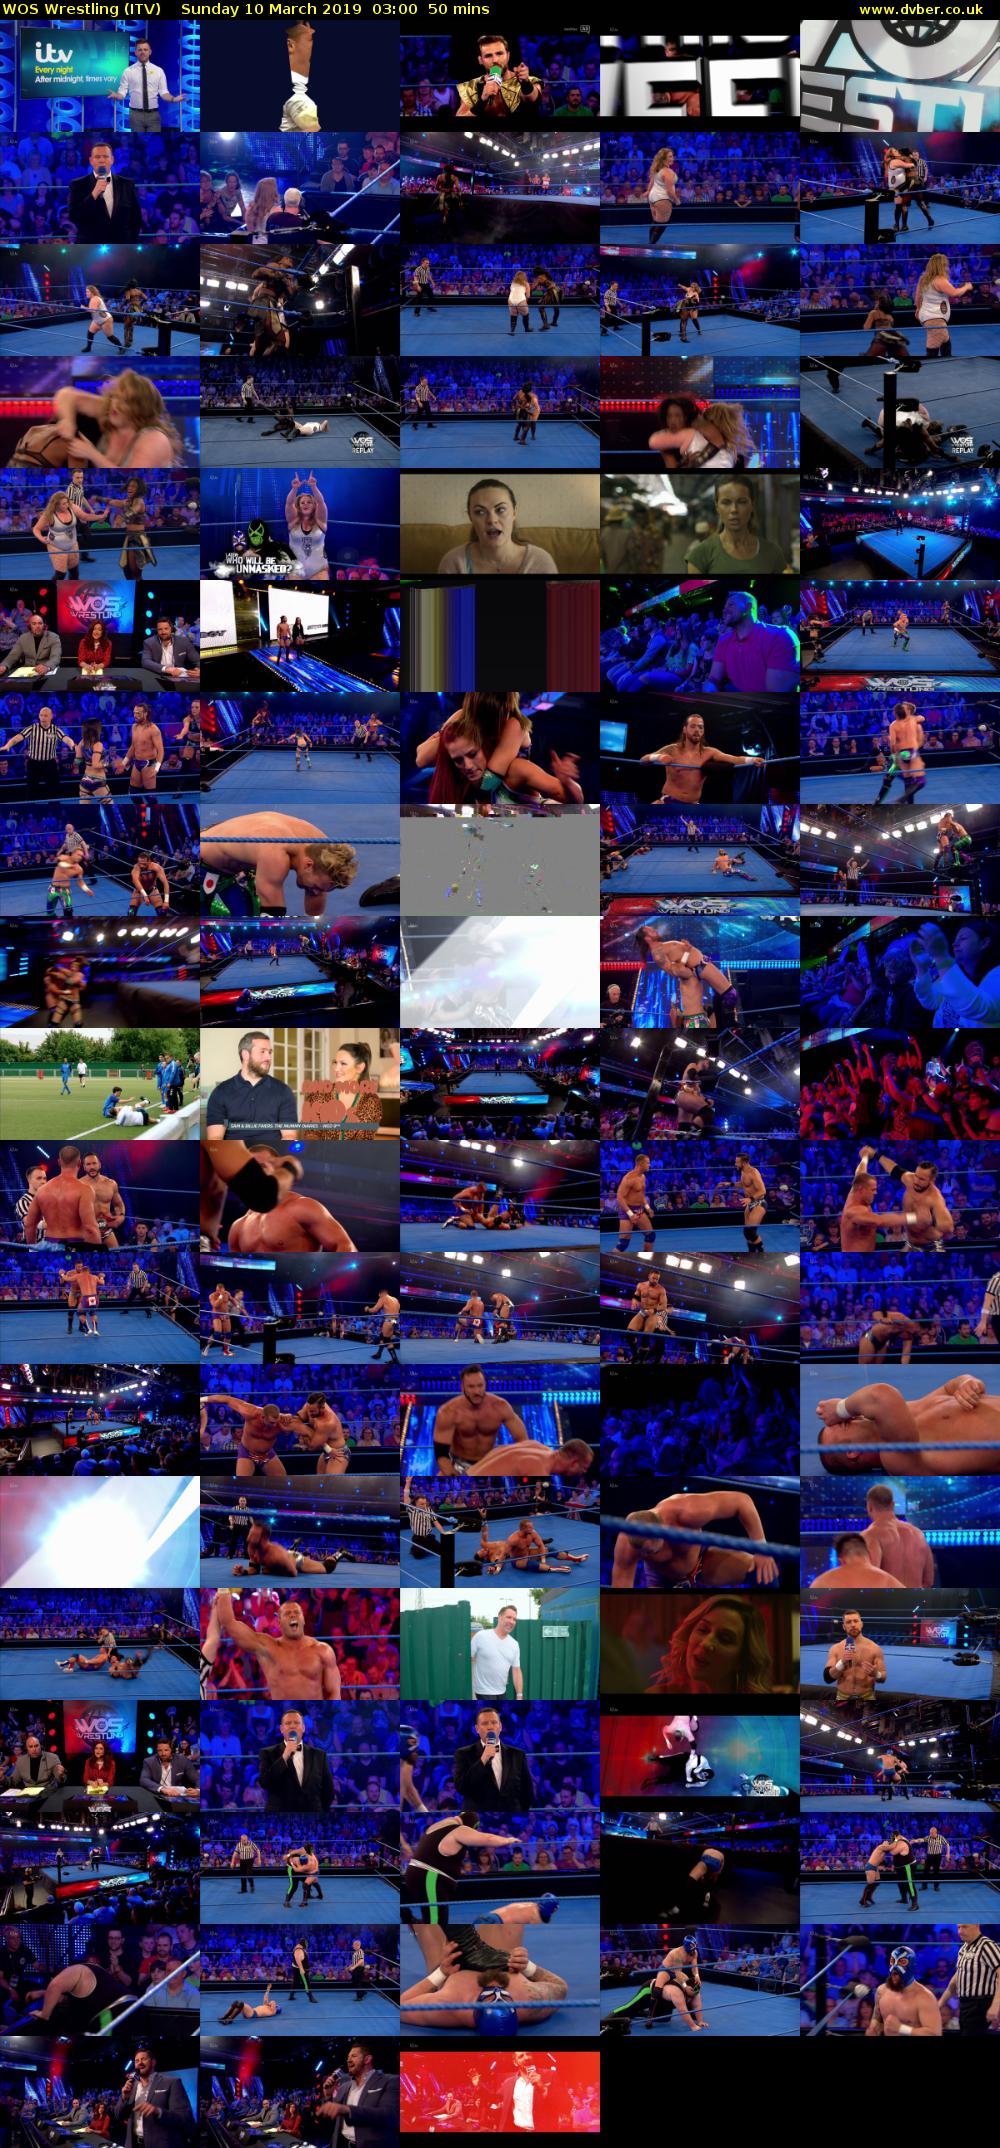 WOS Wrestling (ITV) Sunday 10 March 2019 03:00 - 03:50